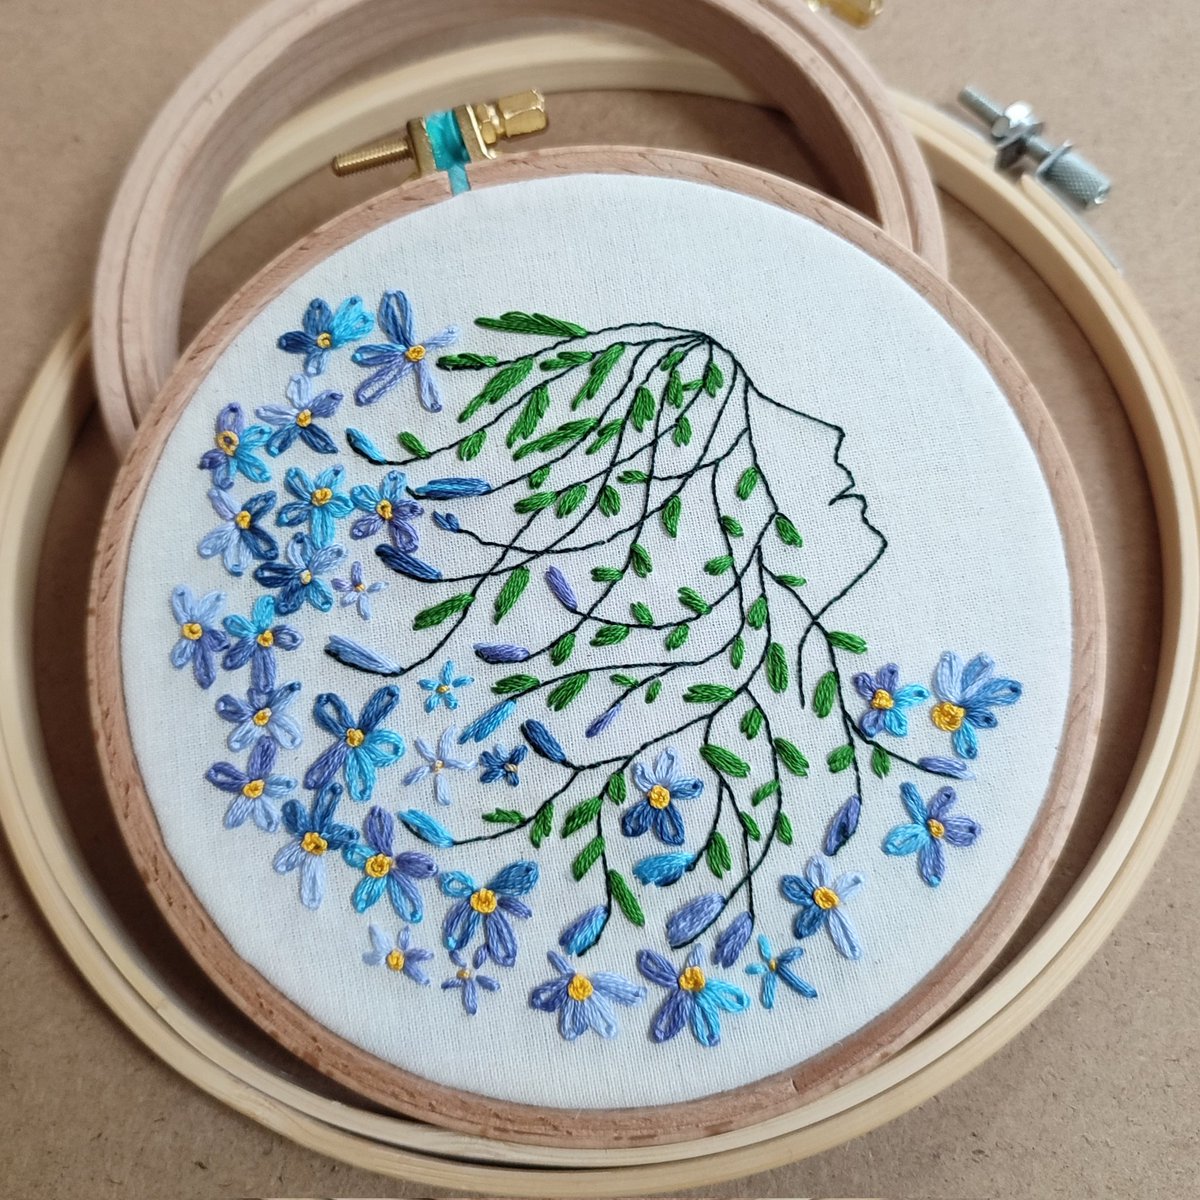 Who's that girl? Abstract dreamy boho style embroidery hoop art. Come and find her etsy.com/shop/MarieJone…
@HandmadeHour #HandmadeHour #etsygifts #giftforher #embroideryhoopart #handmade #WomensArt #floralart